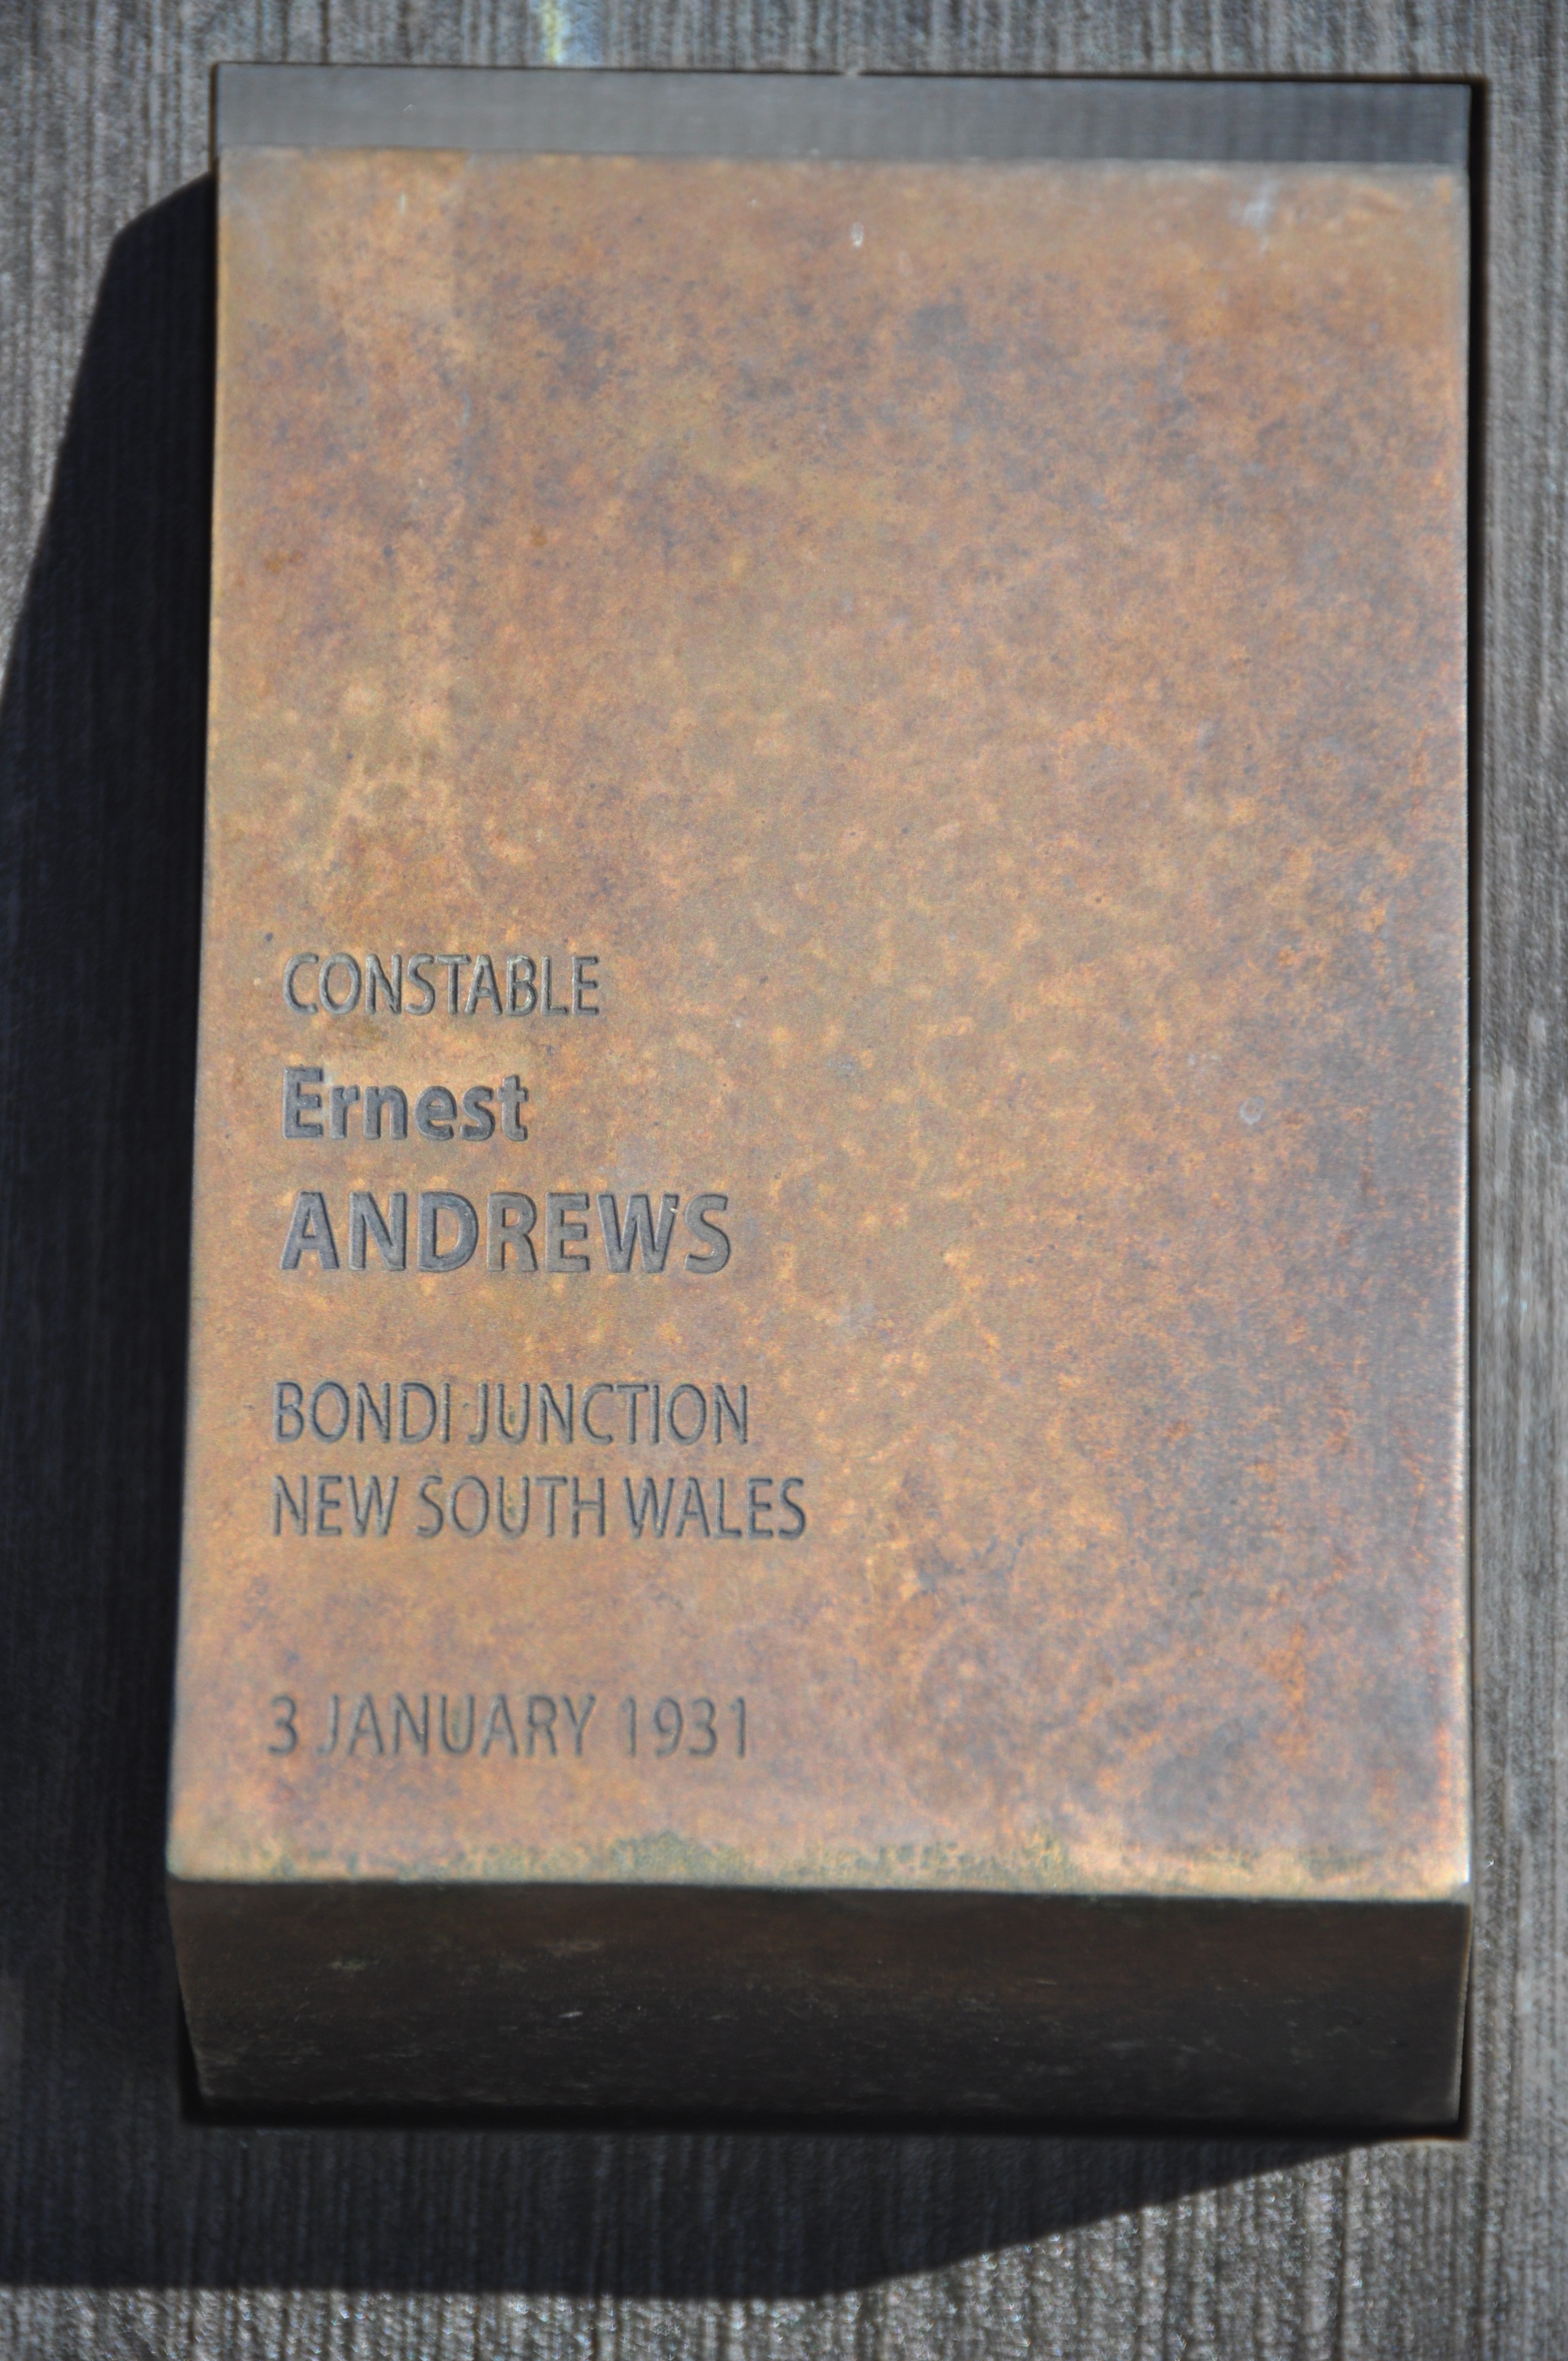 Ernest ANDREWS touch plate at the National Police Wall of Remembrance, Canberra